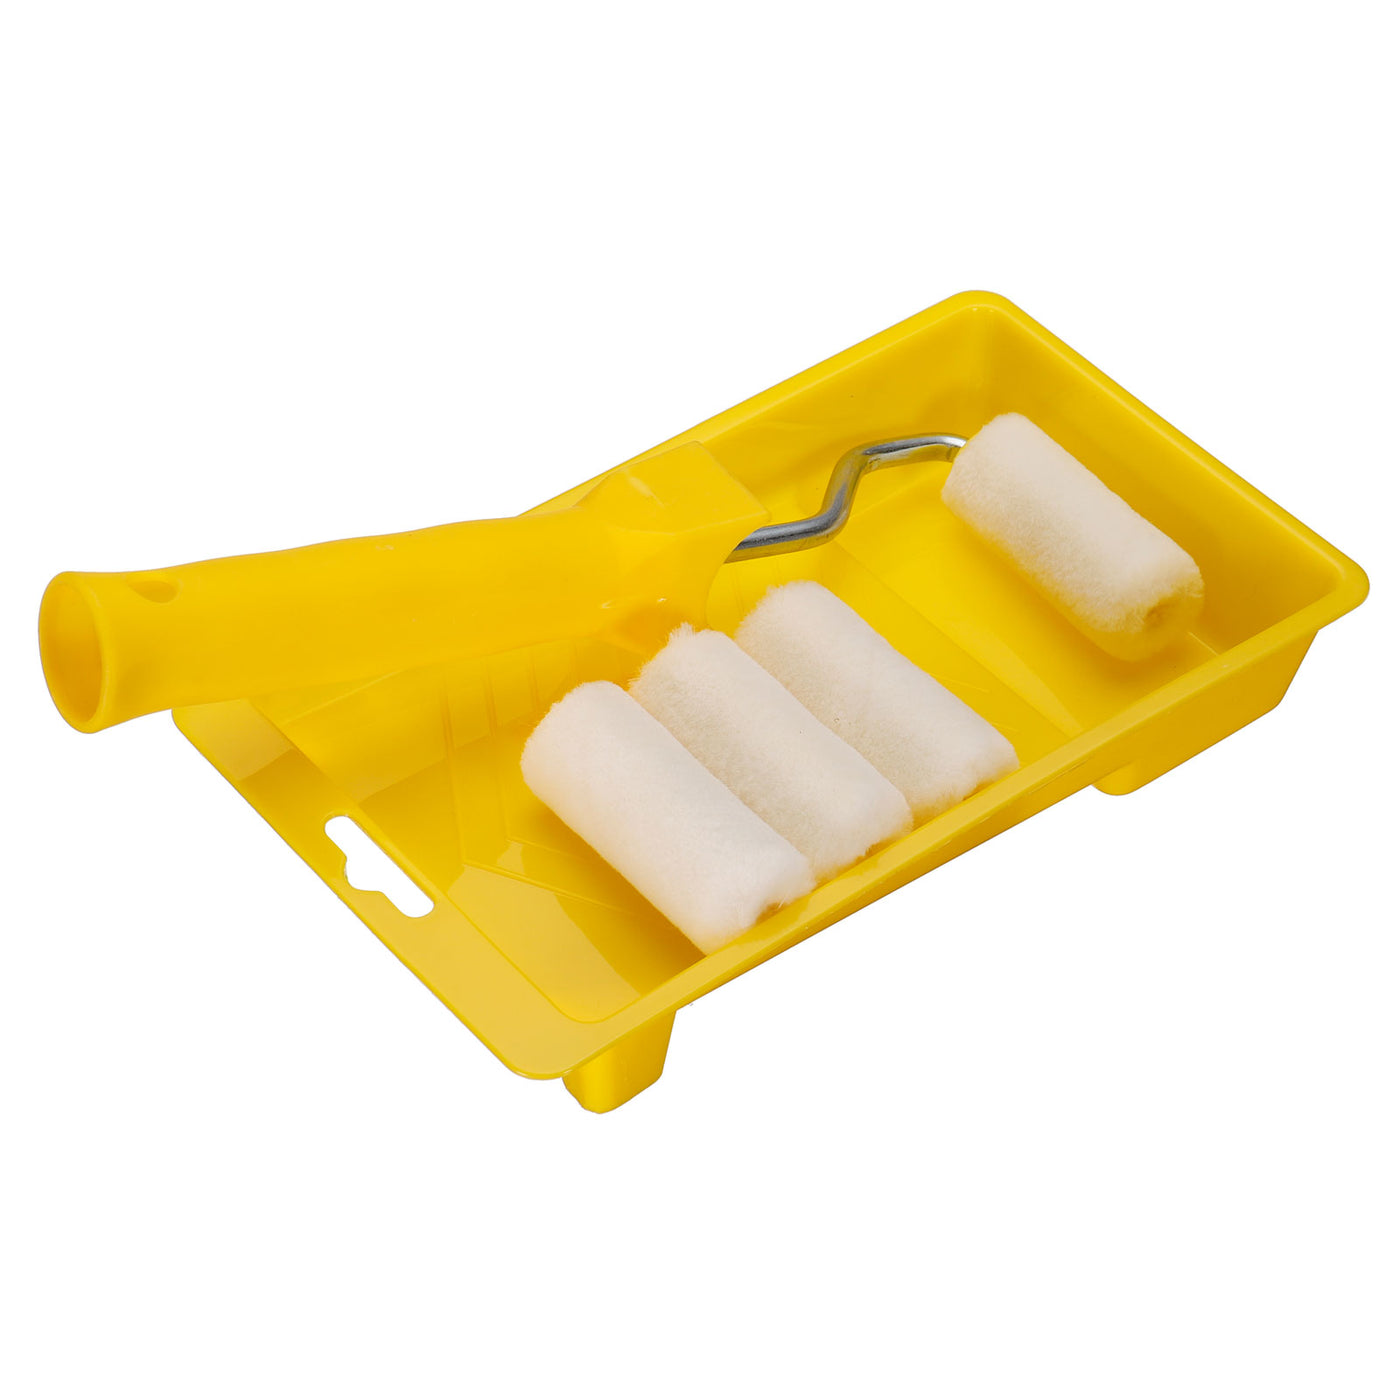 uxcell Uxcell 6Pcs Paint Roller Kit, 2Inch Wool Paint Rollers, Tray, 20cm Length Frame